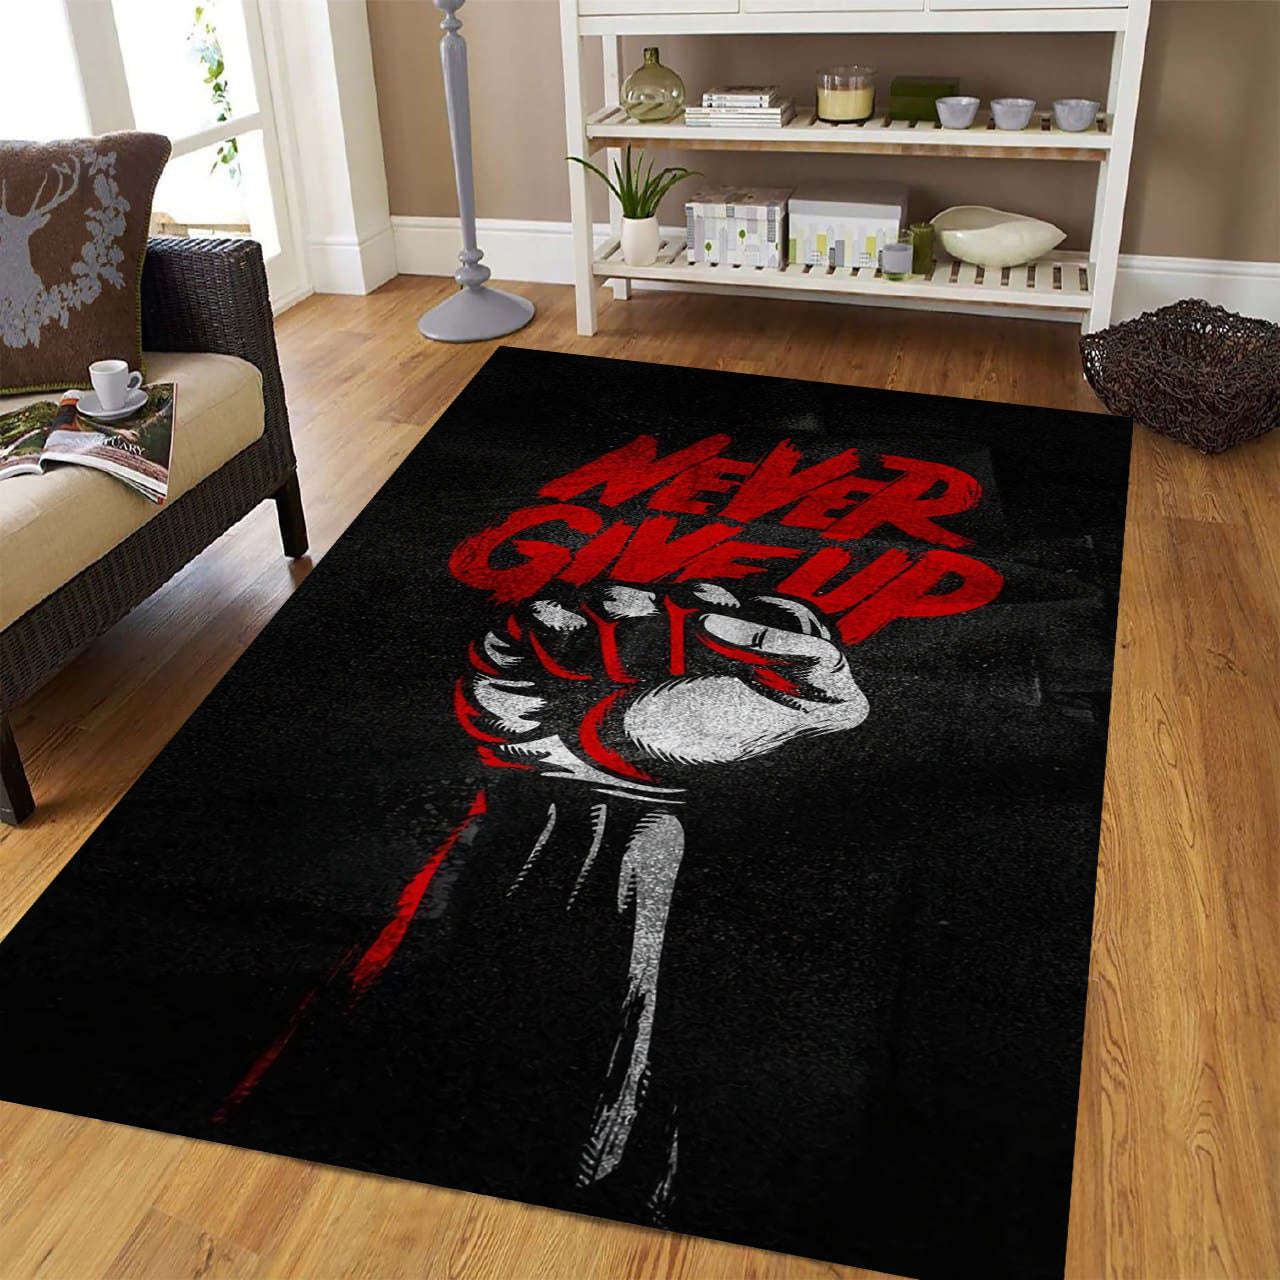 Home Gym Decor Motivational Rug Fitness gifts